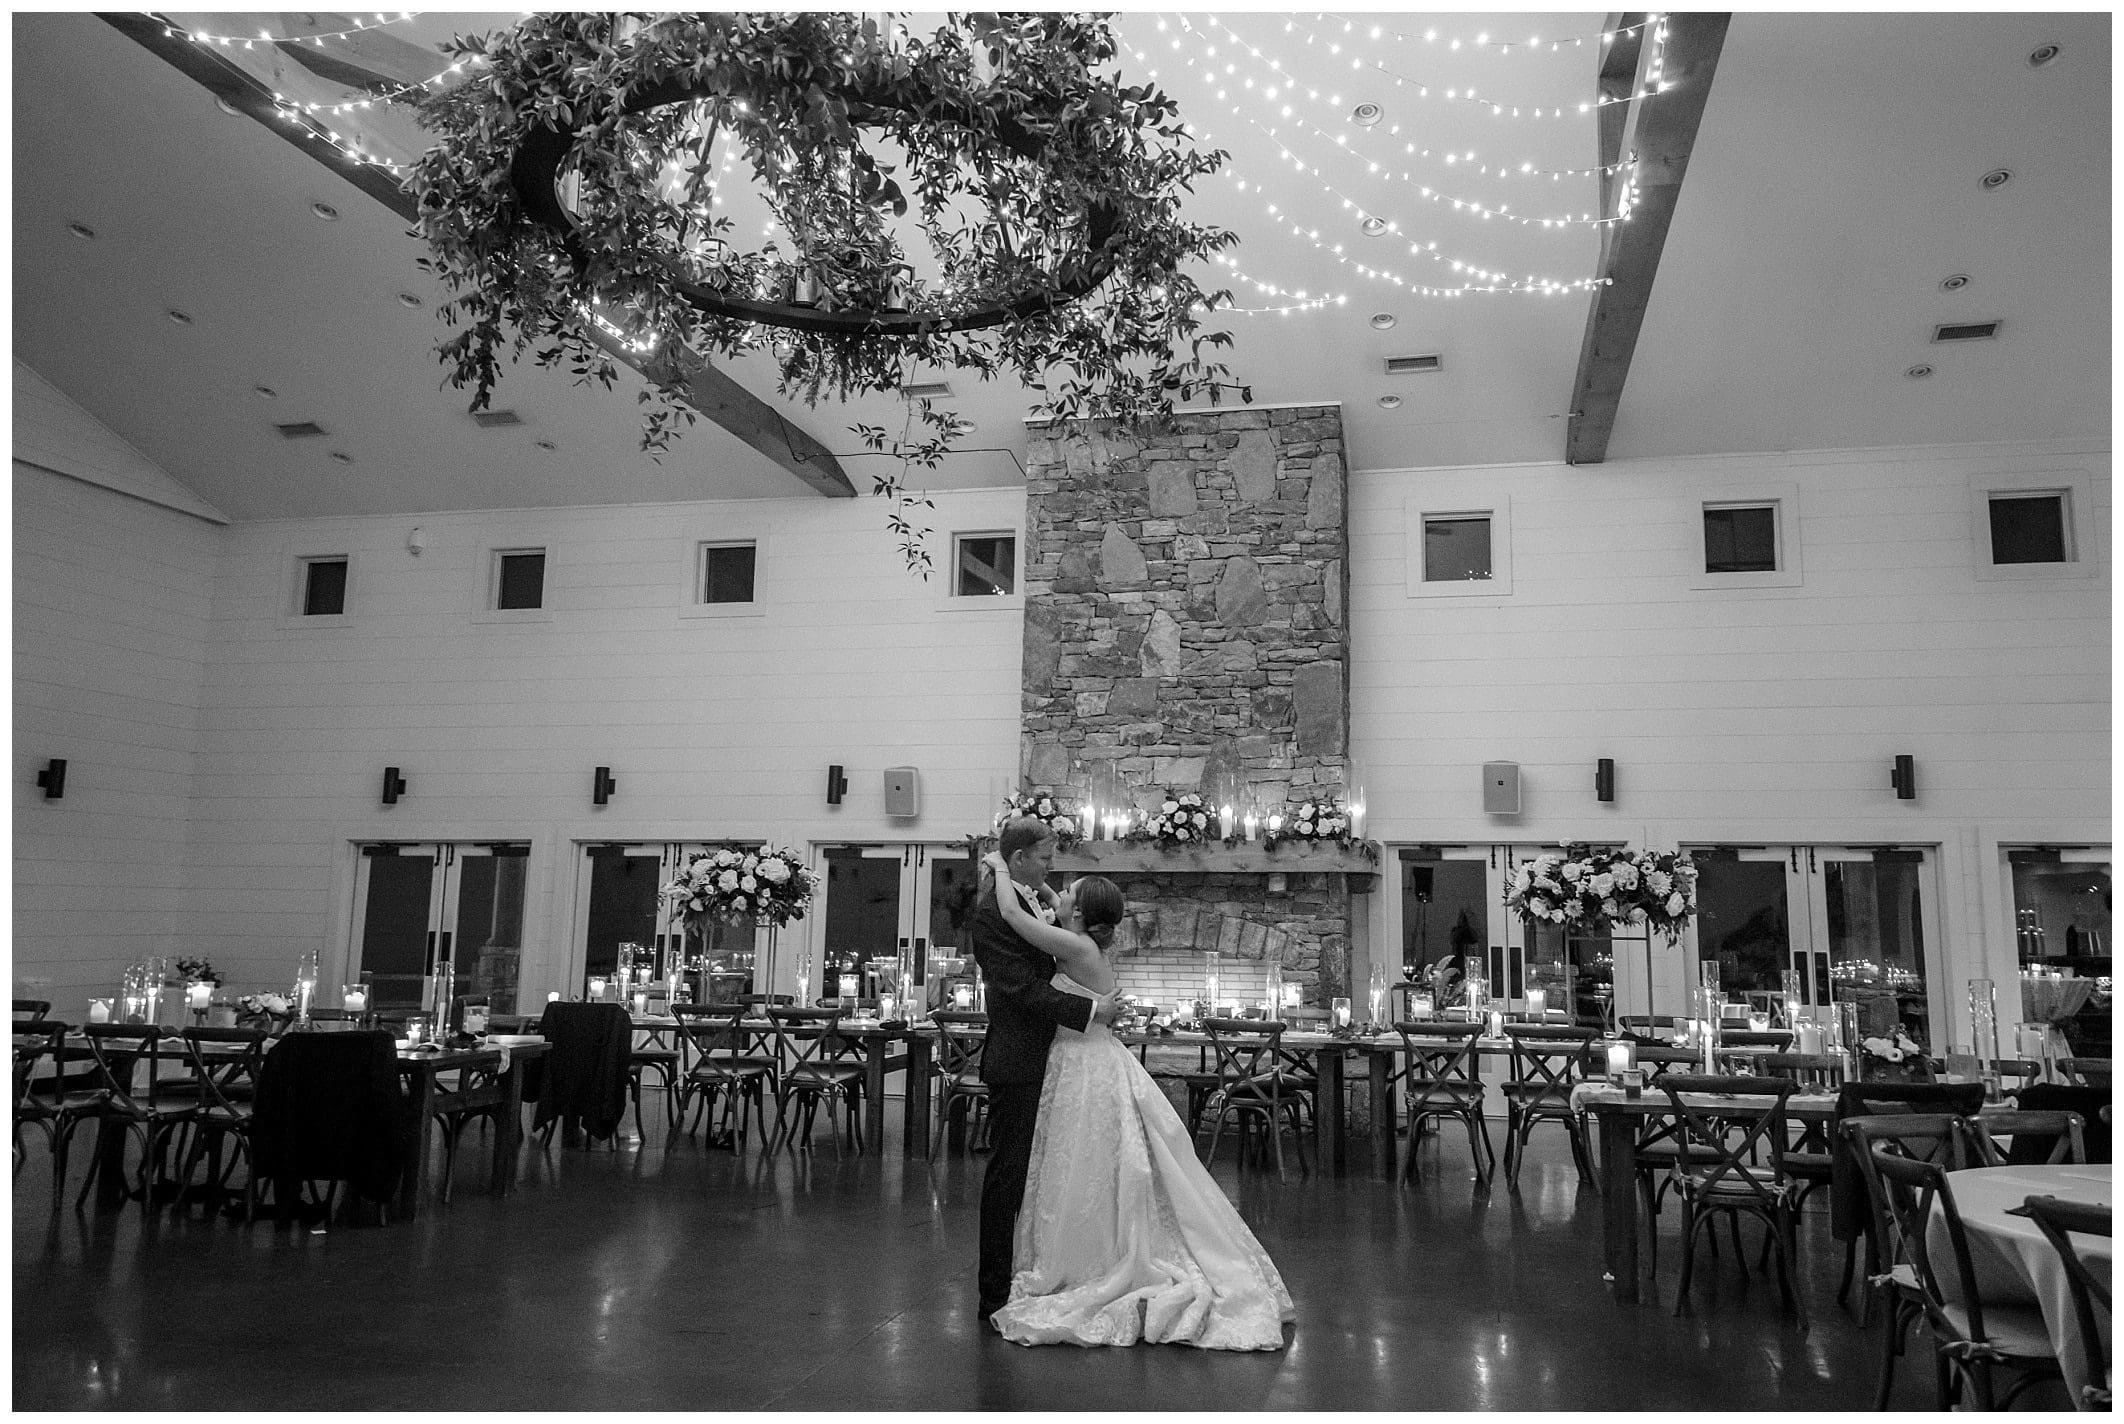 A black and white photo of a bride and groom dancing in a ballroom.